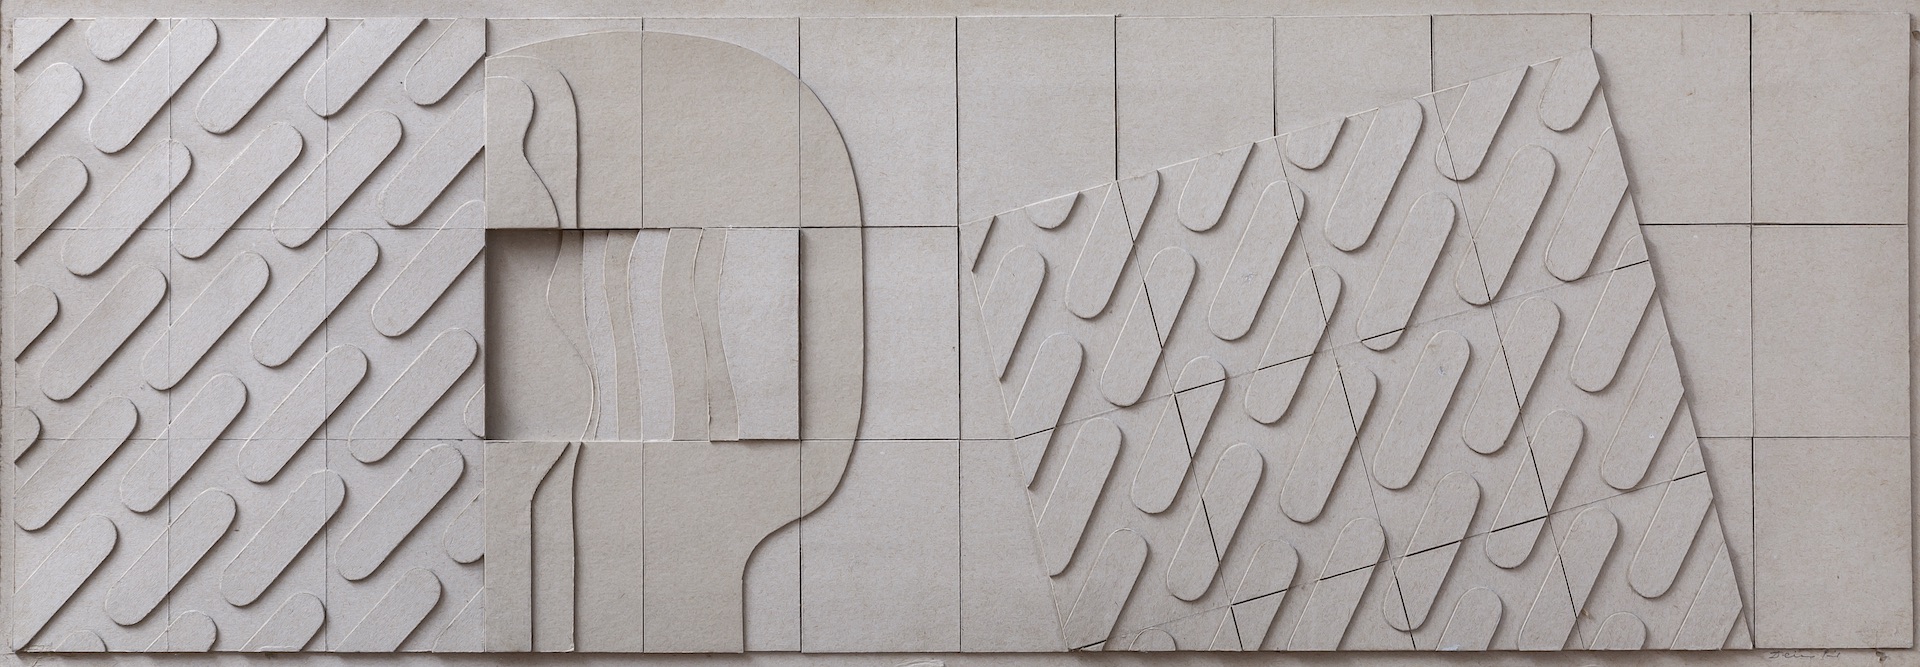 Deim Pál (1932-2016) Cardboard Relief (mural design for the meeting room of Hotel Stadion), 1981